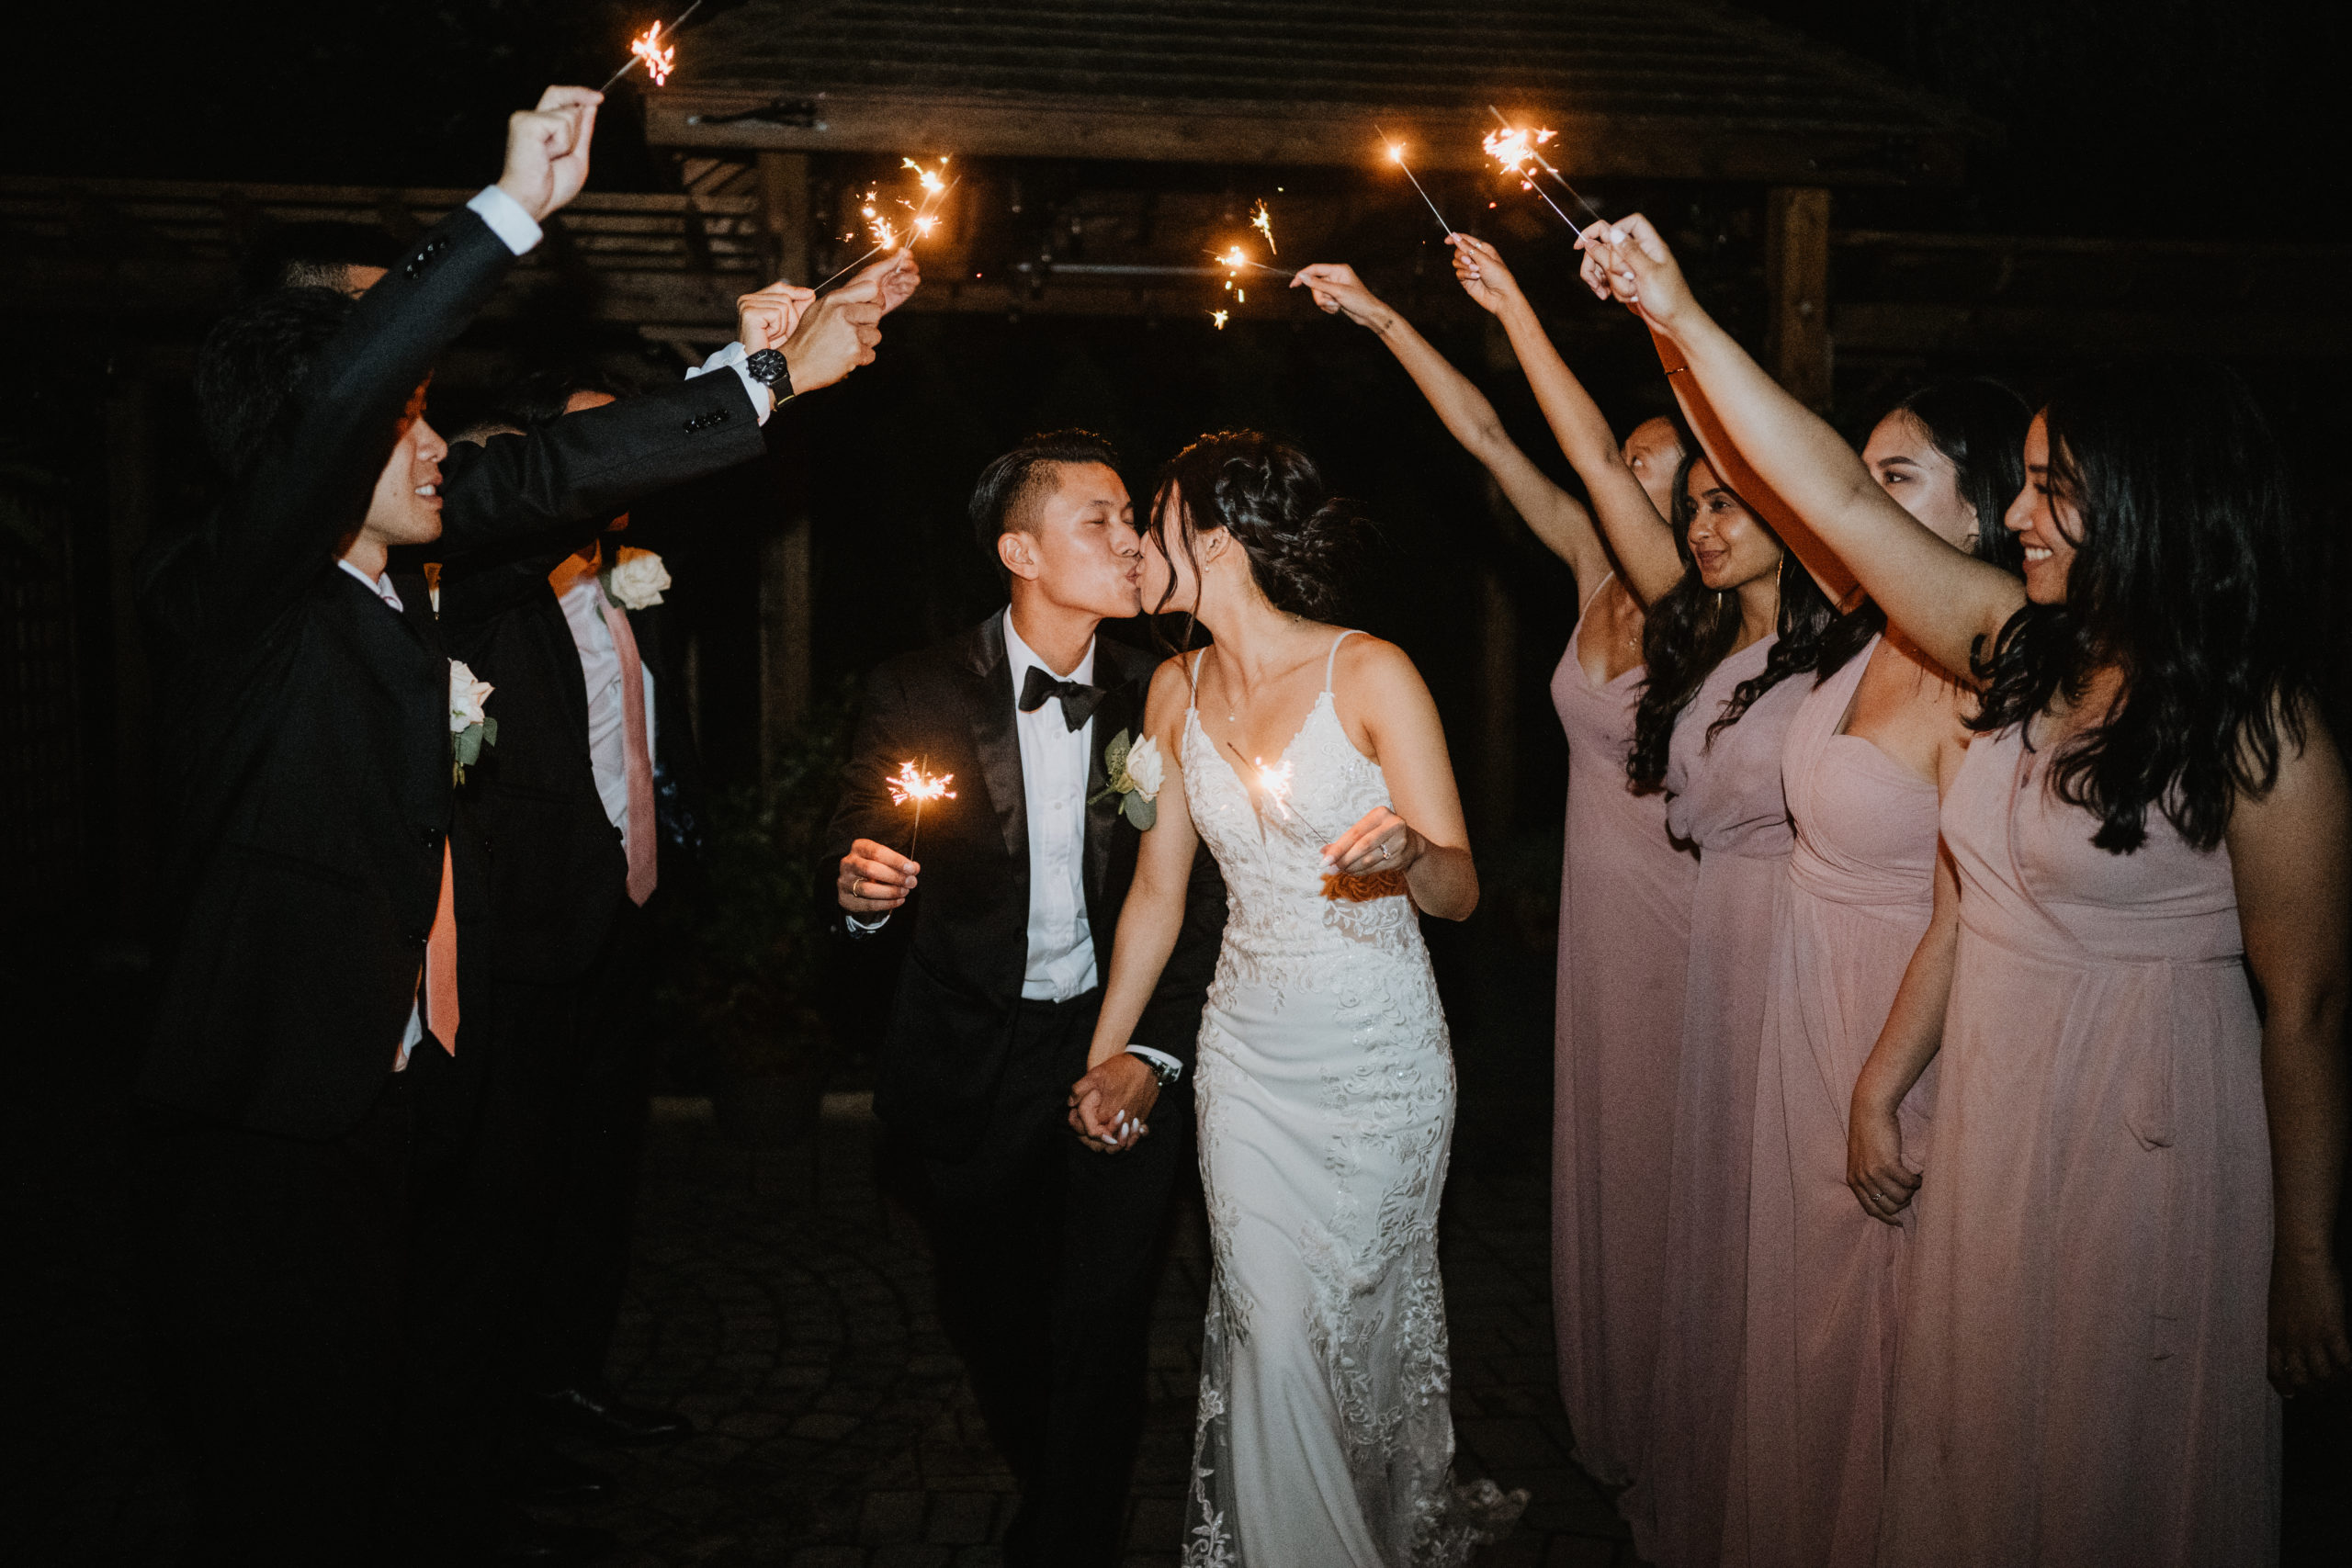 Billy and Petrina kissing on the dance floor while their friends hold sparklers above their heads